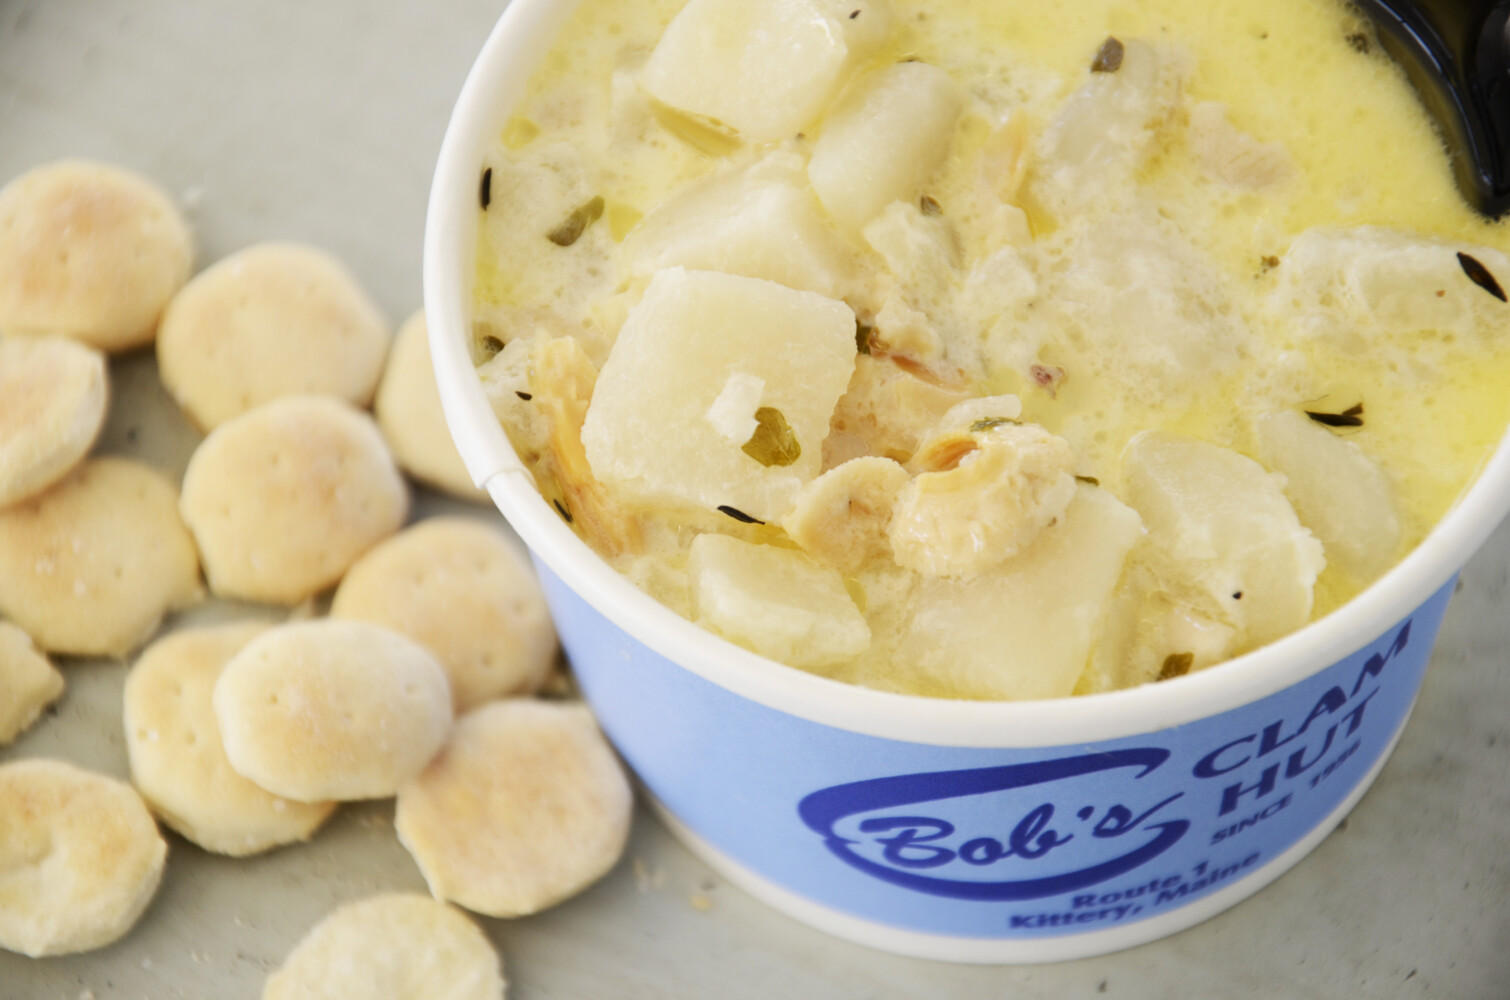 Price Points: Three takes on traditional clam chowder